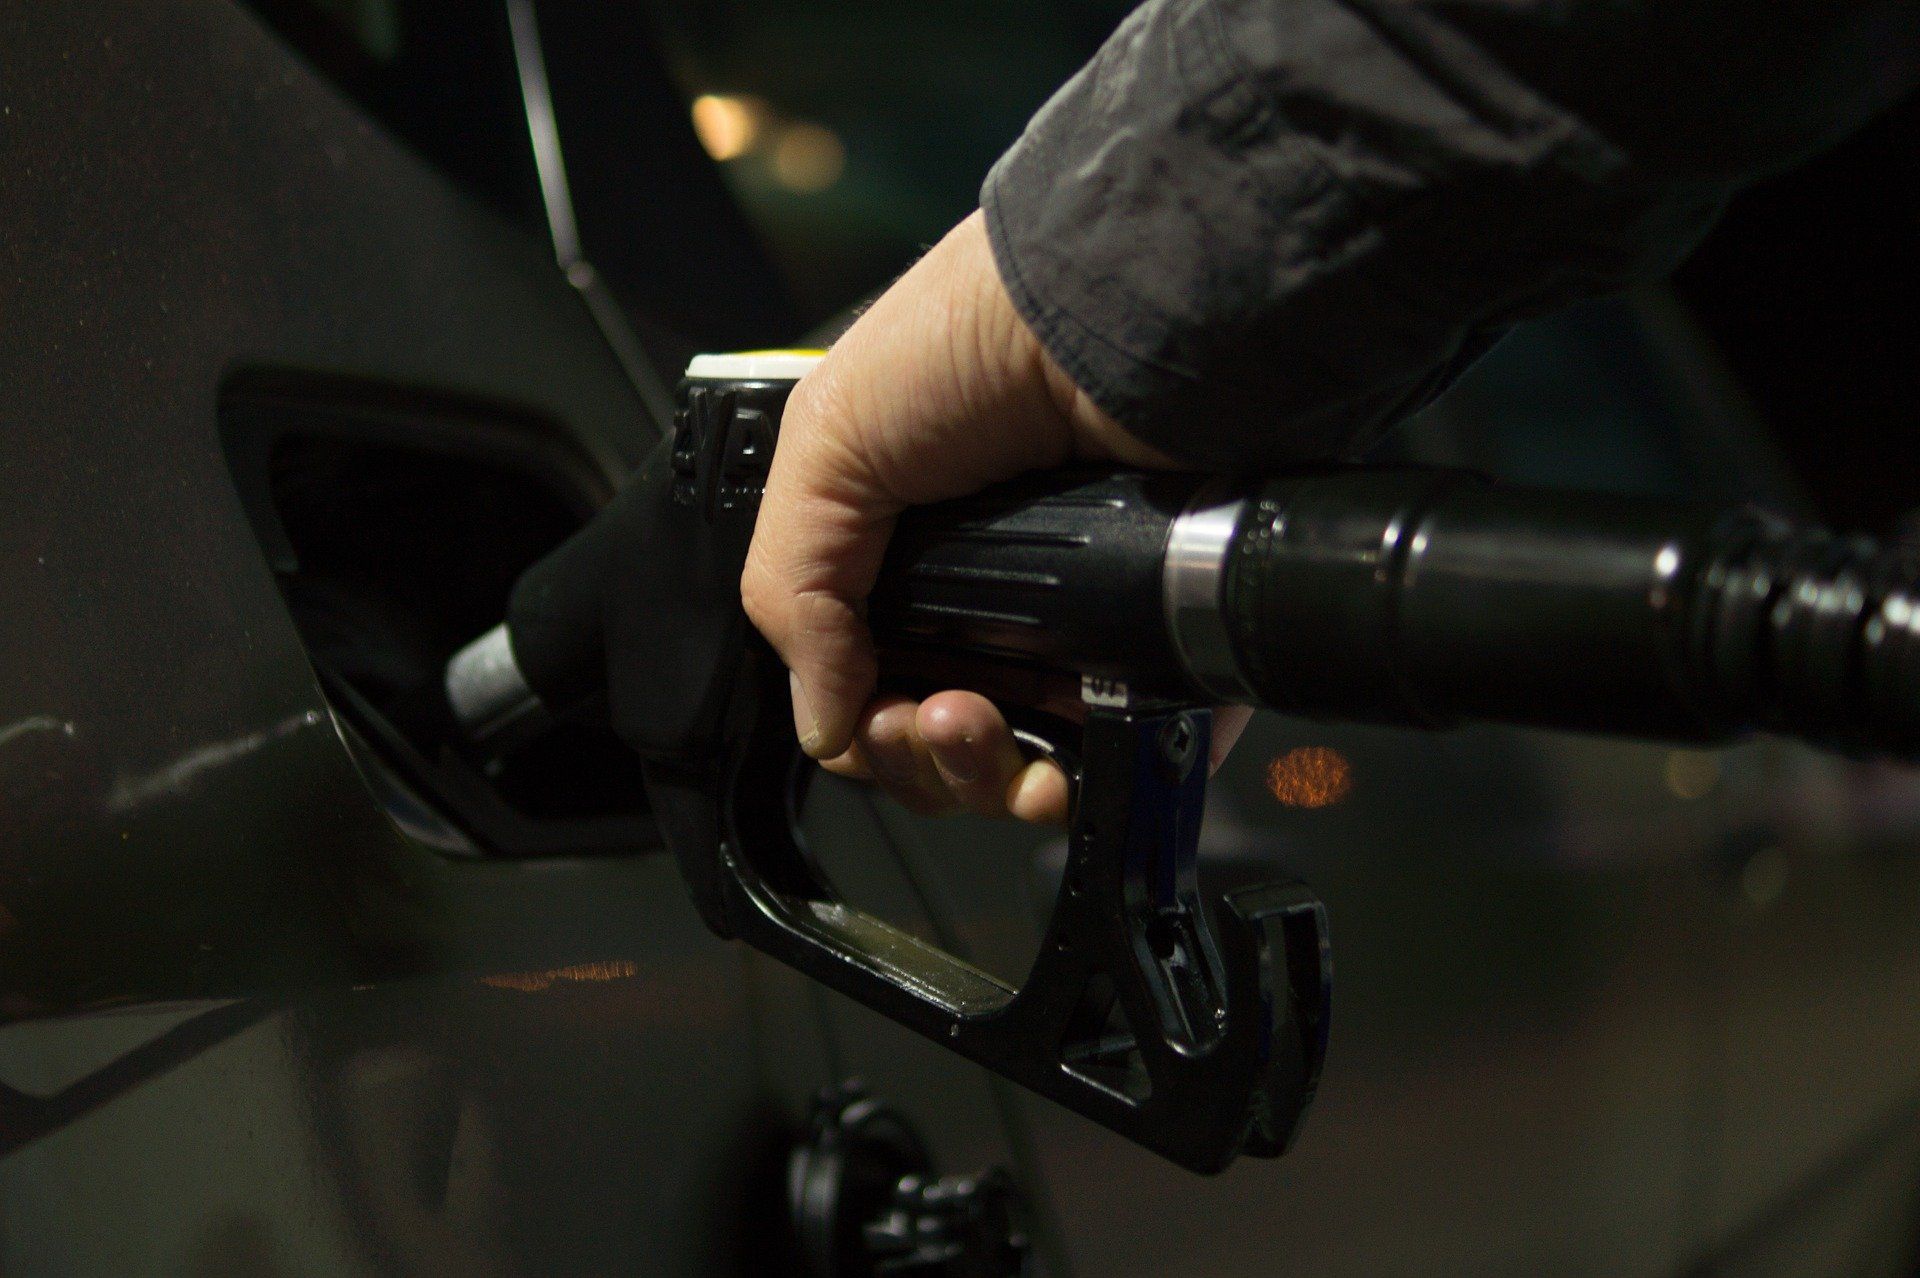 Fuel prices: Petrol priced at Rs 95.41, diesel Rs 86.67 in Delhi on January 20, 2022